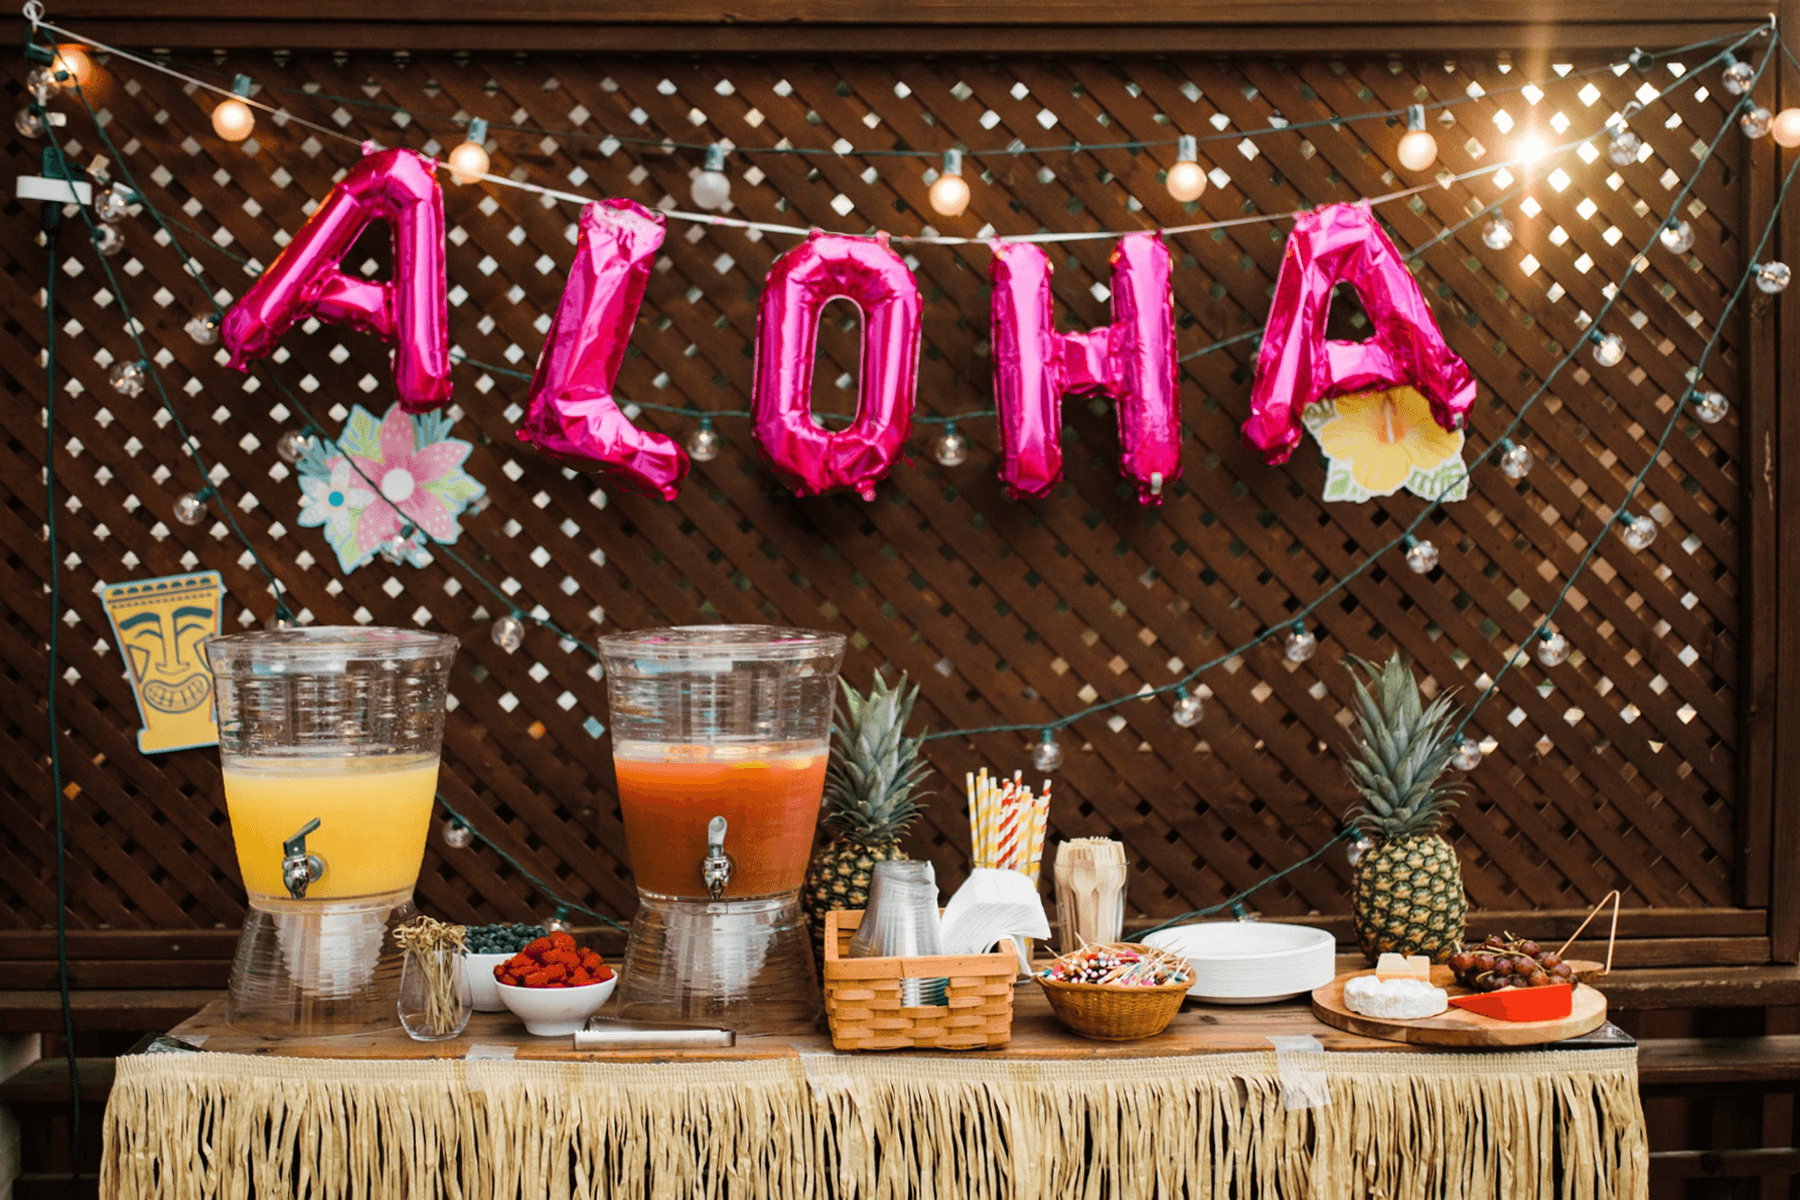 An outdoor table with grass trim has drink dispensers and pineapples and a pink balloon ‘ALOHA’ banner